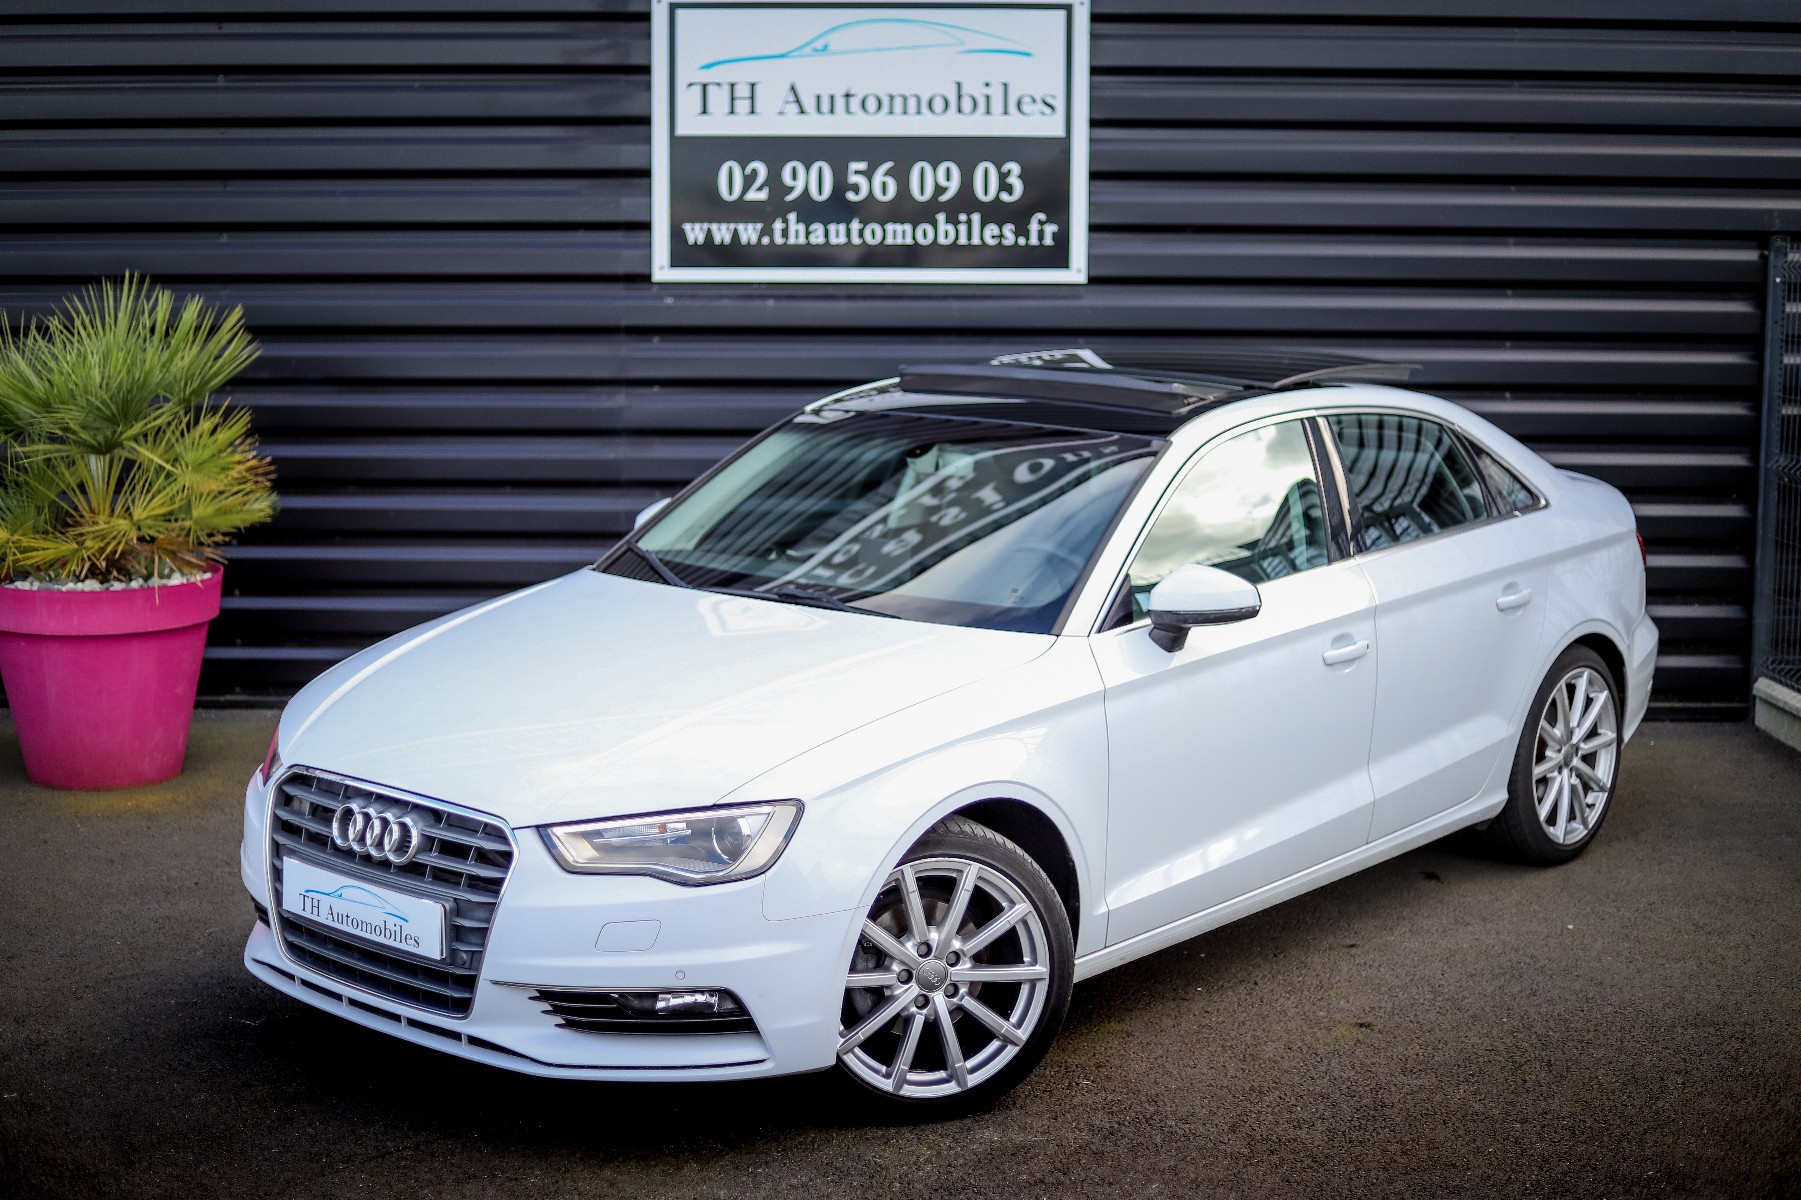 AUDI A3 BERLINE 2.0 TDI 150ch AMBITION LUXE S-TRONIC